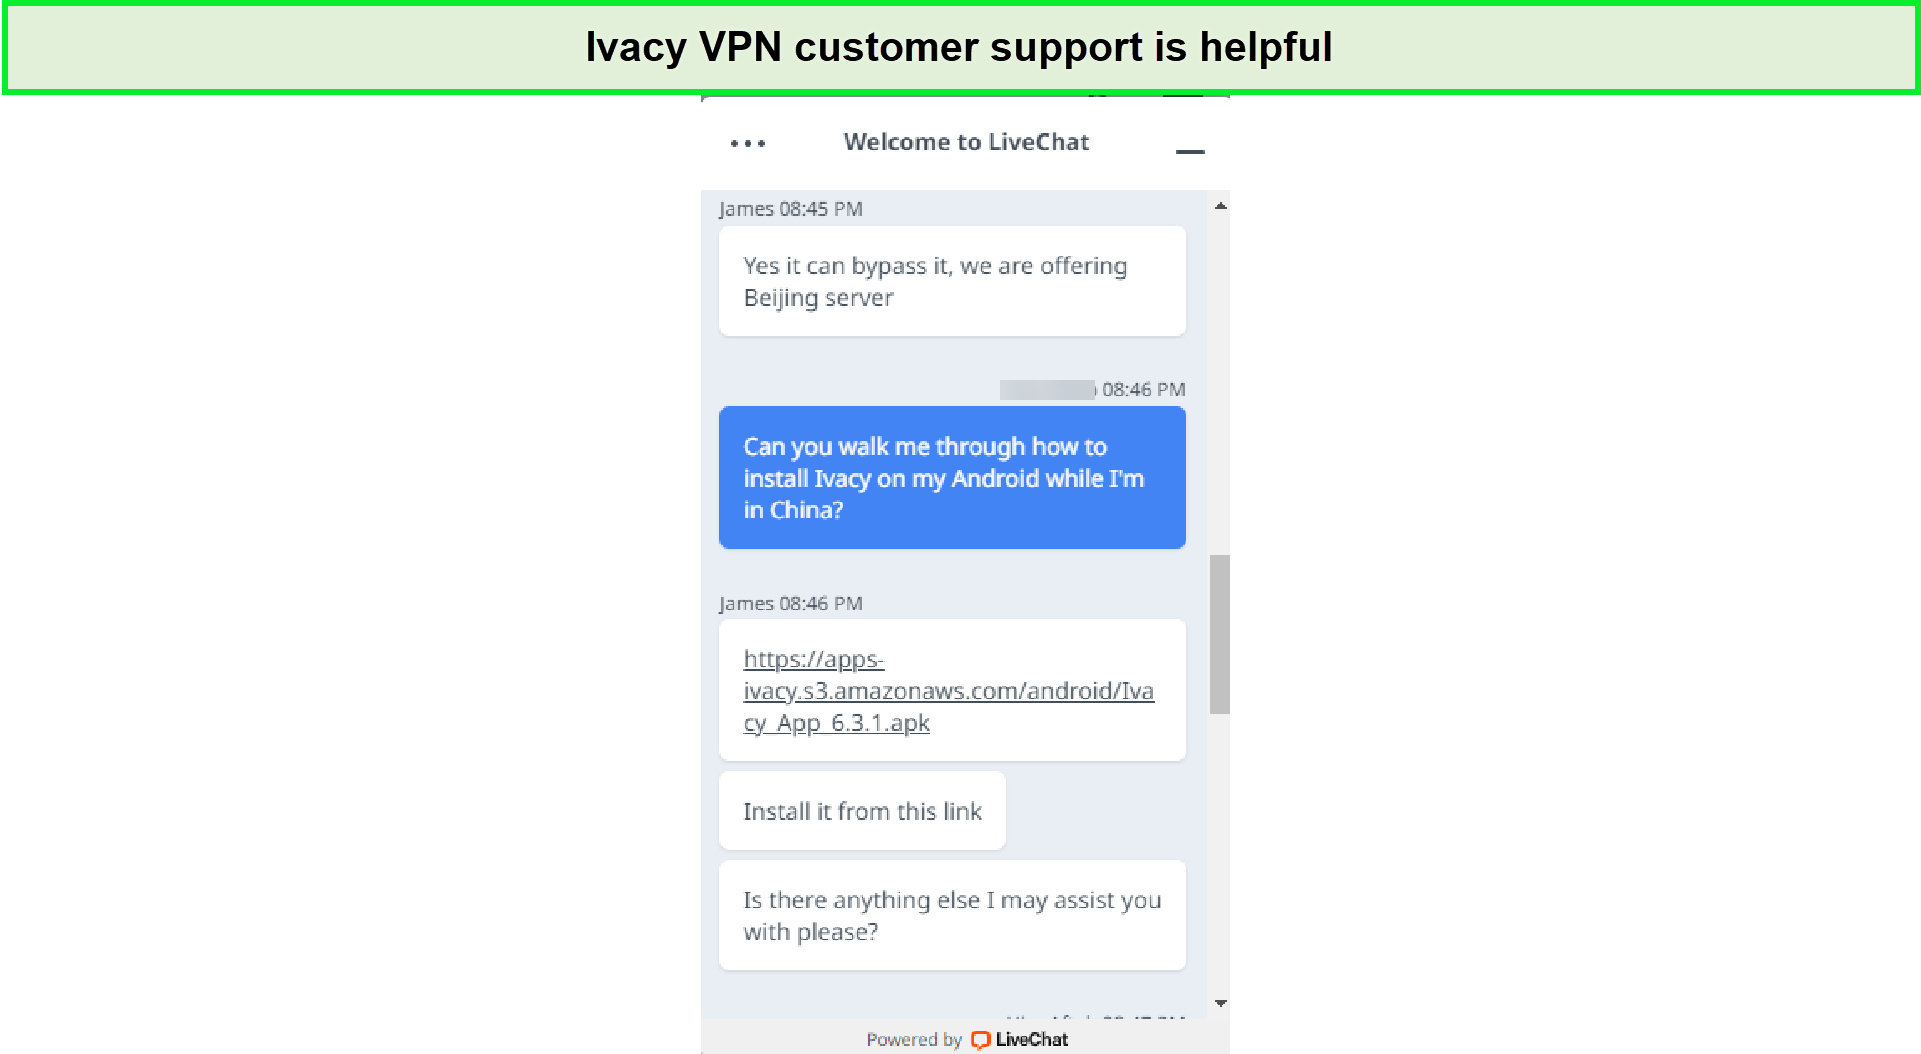 ivacy-customer-support-in-Germany